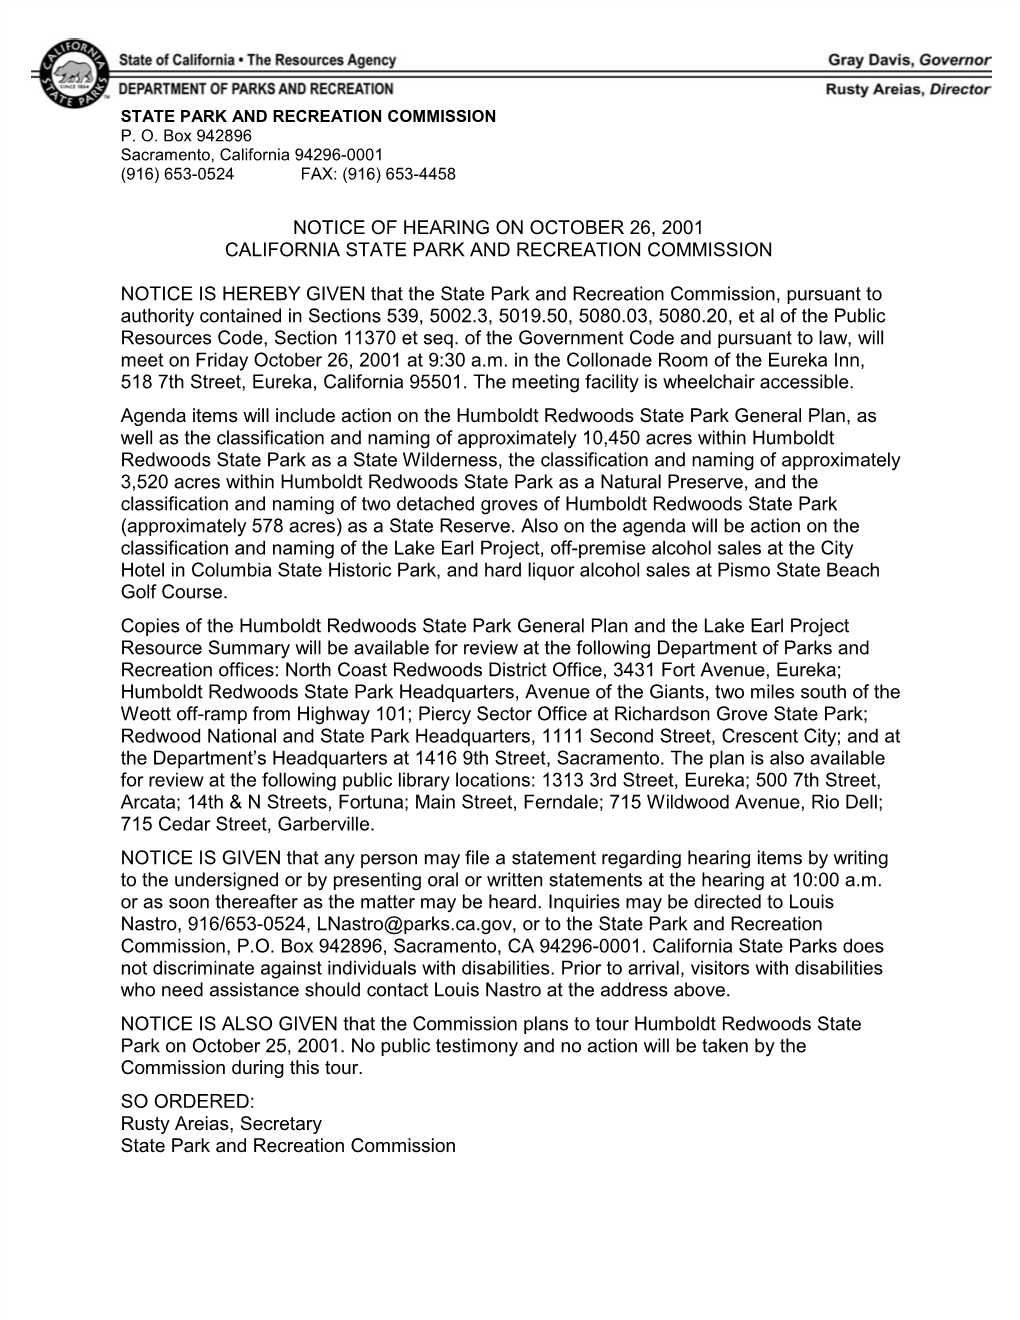 Notice of Hearing on October 26, 2001 California State Park and Recreation Commission